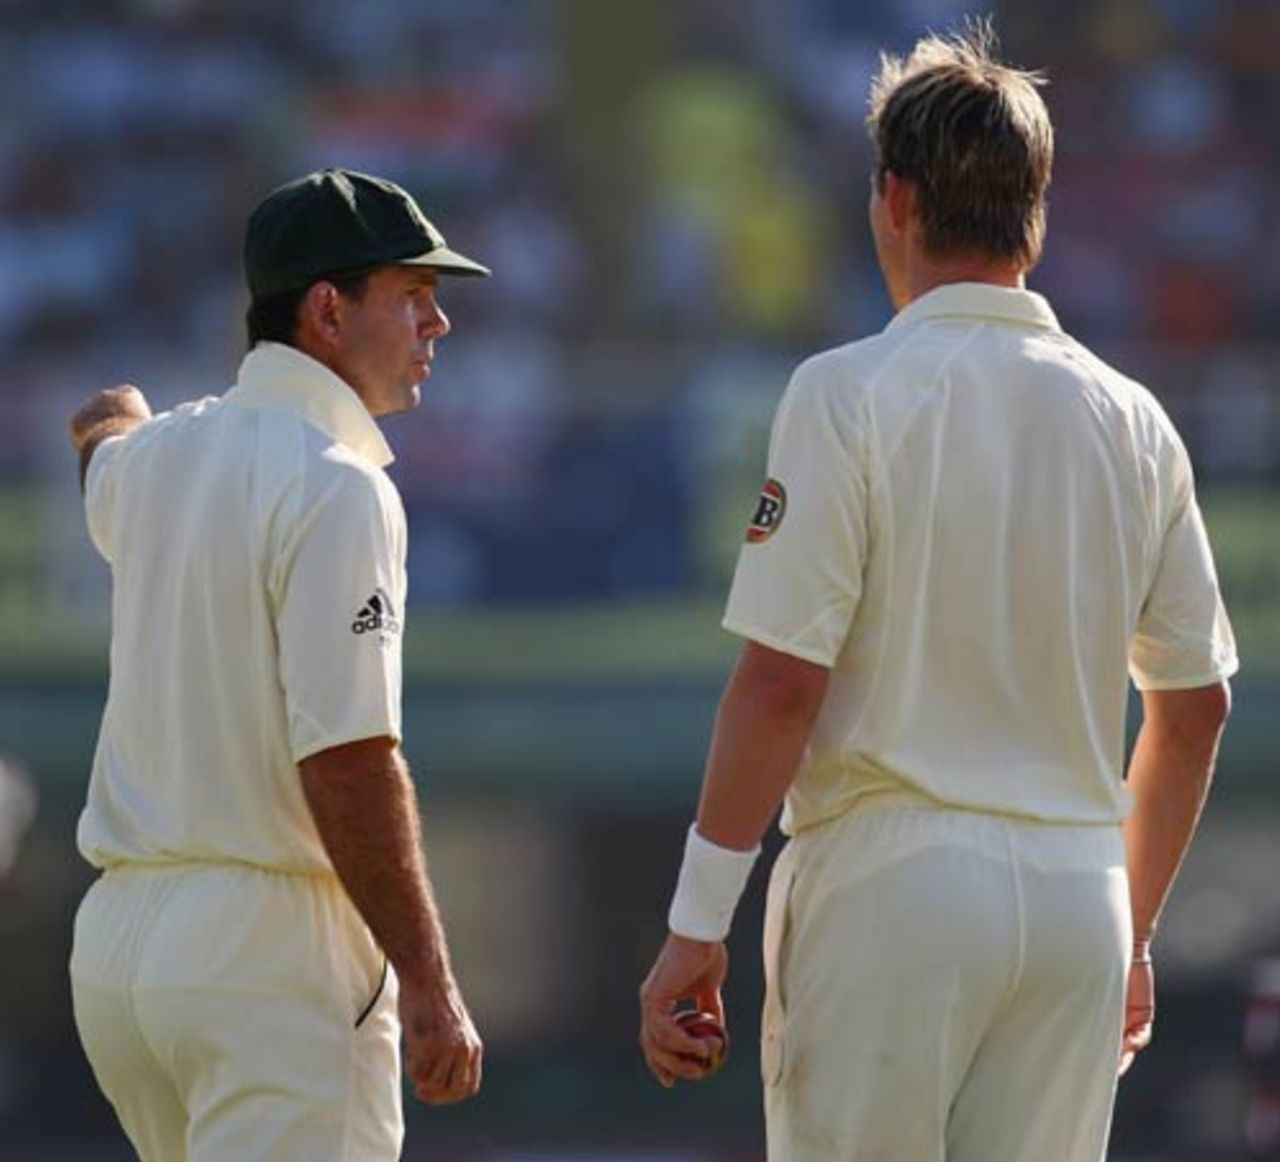 Ricky Ponting sets the field with Brett Lee, India v Australia, 2nd Test, Mohali, 3rd day, October 19, 2008